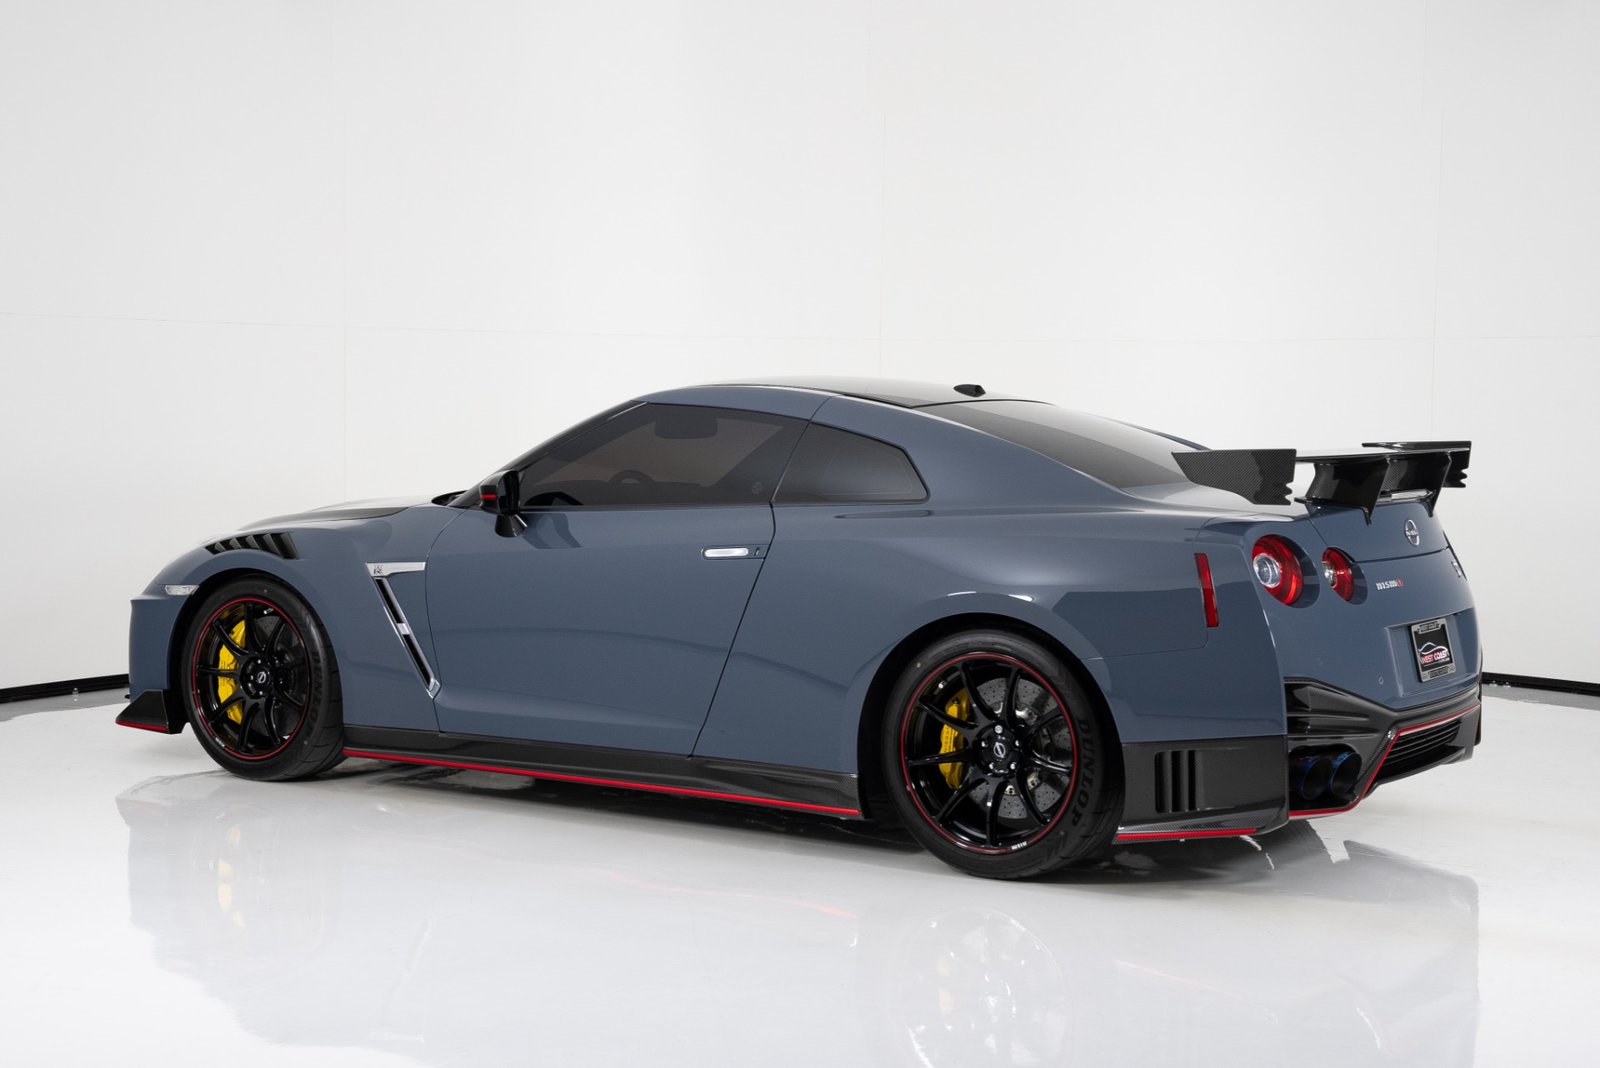 New 2021 NISSAN GT-R NISMO SPECIAL EDITION (45)